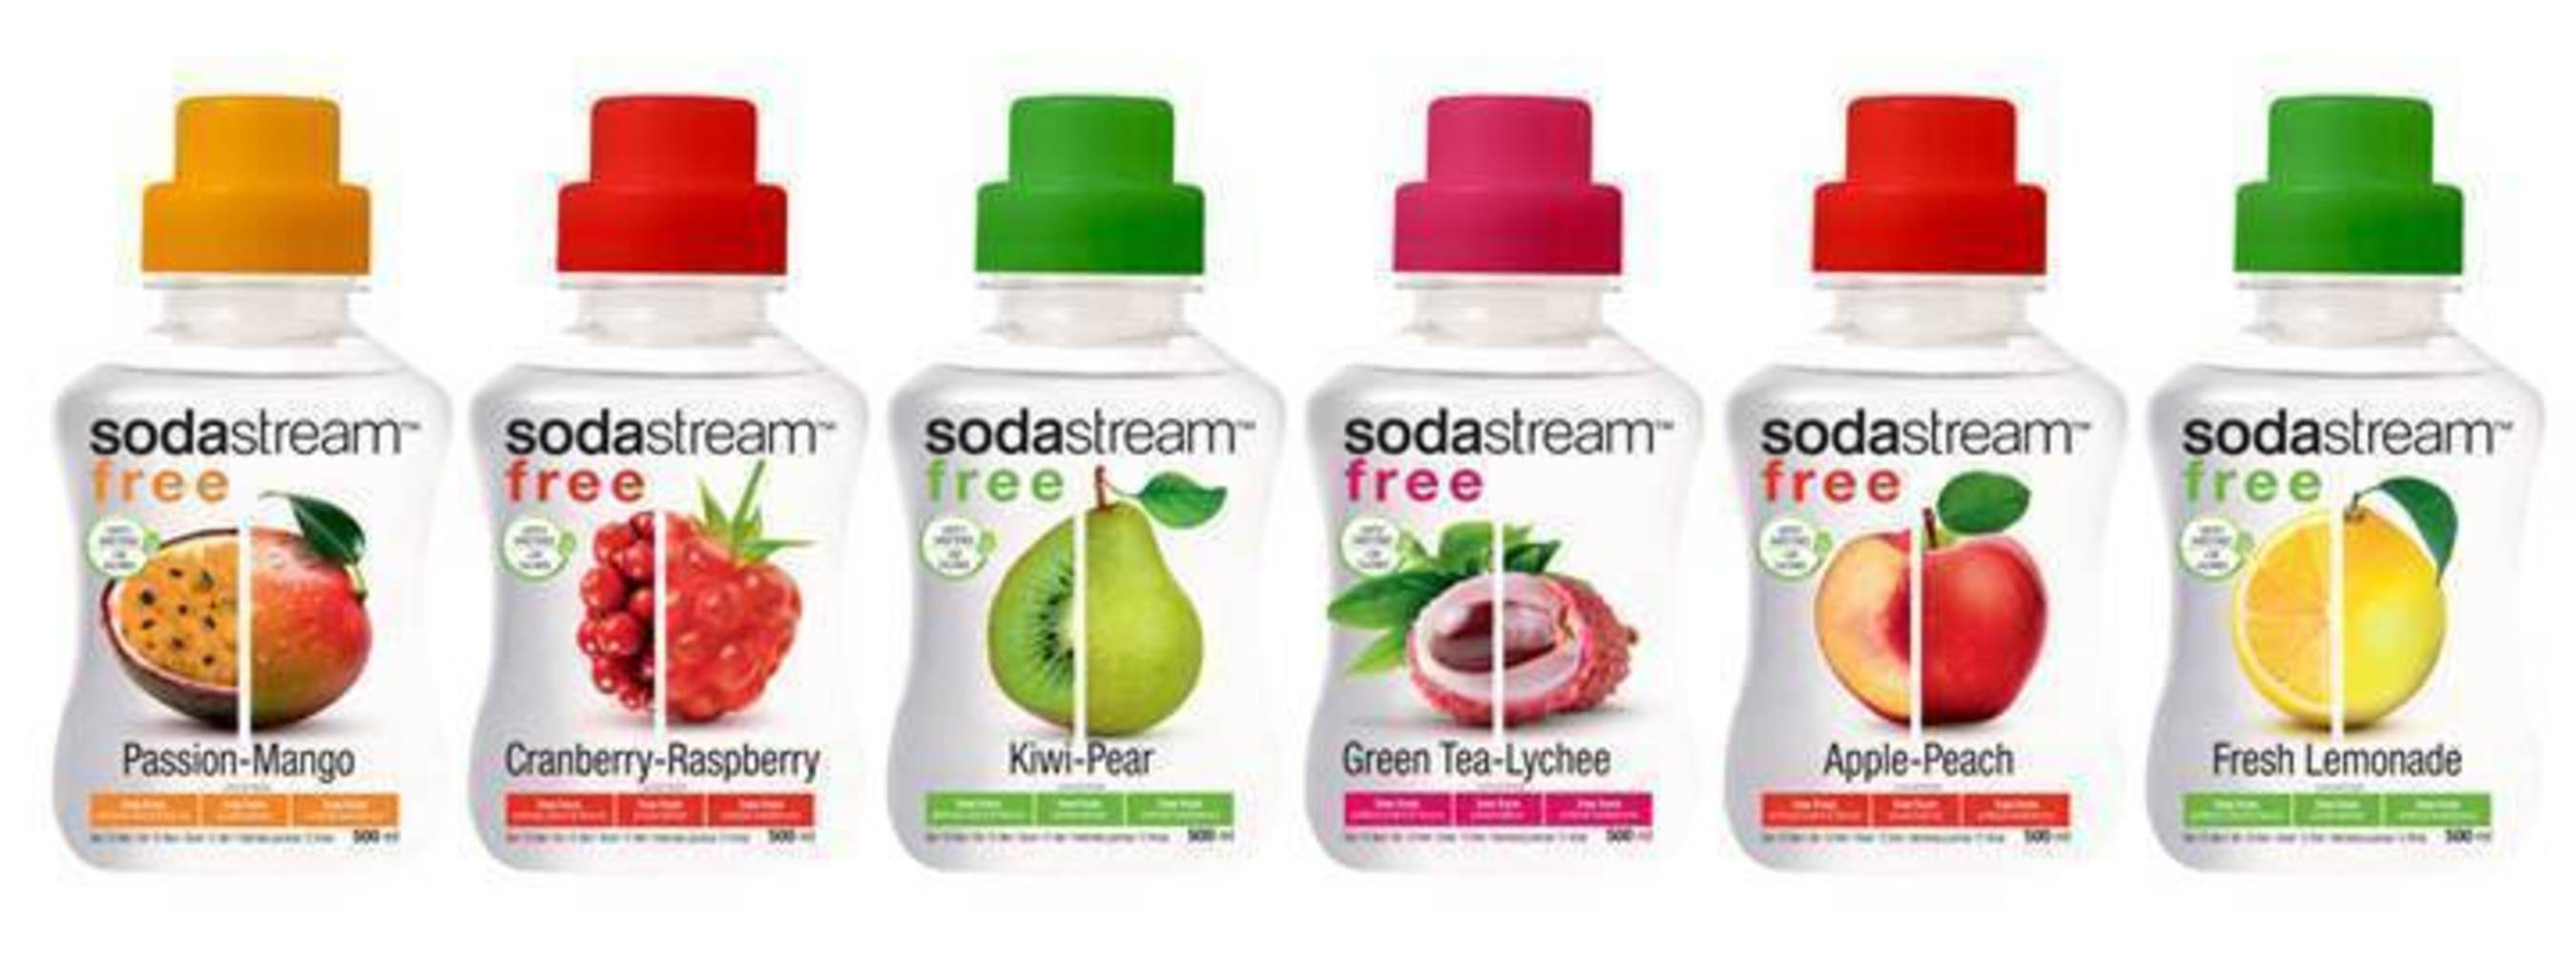 SodaStream Free: Lightly flavored and free from artificial sweeteners, flavors, colors and preservatives. (PRNewsFoto/SodaStream International Ltd)